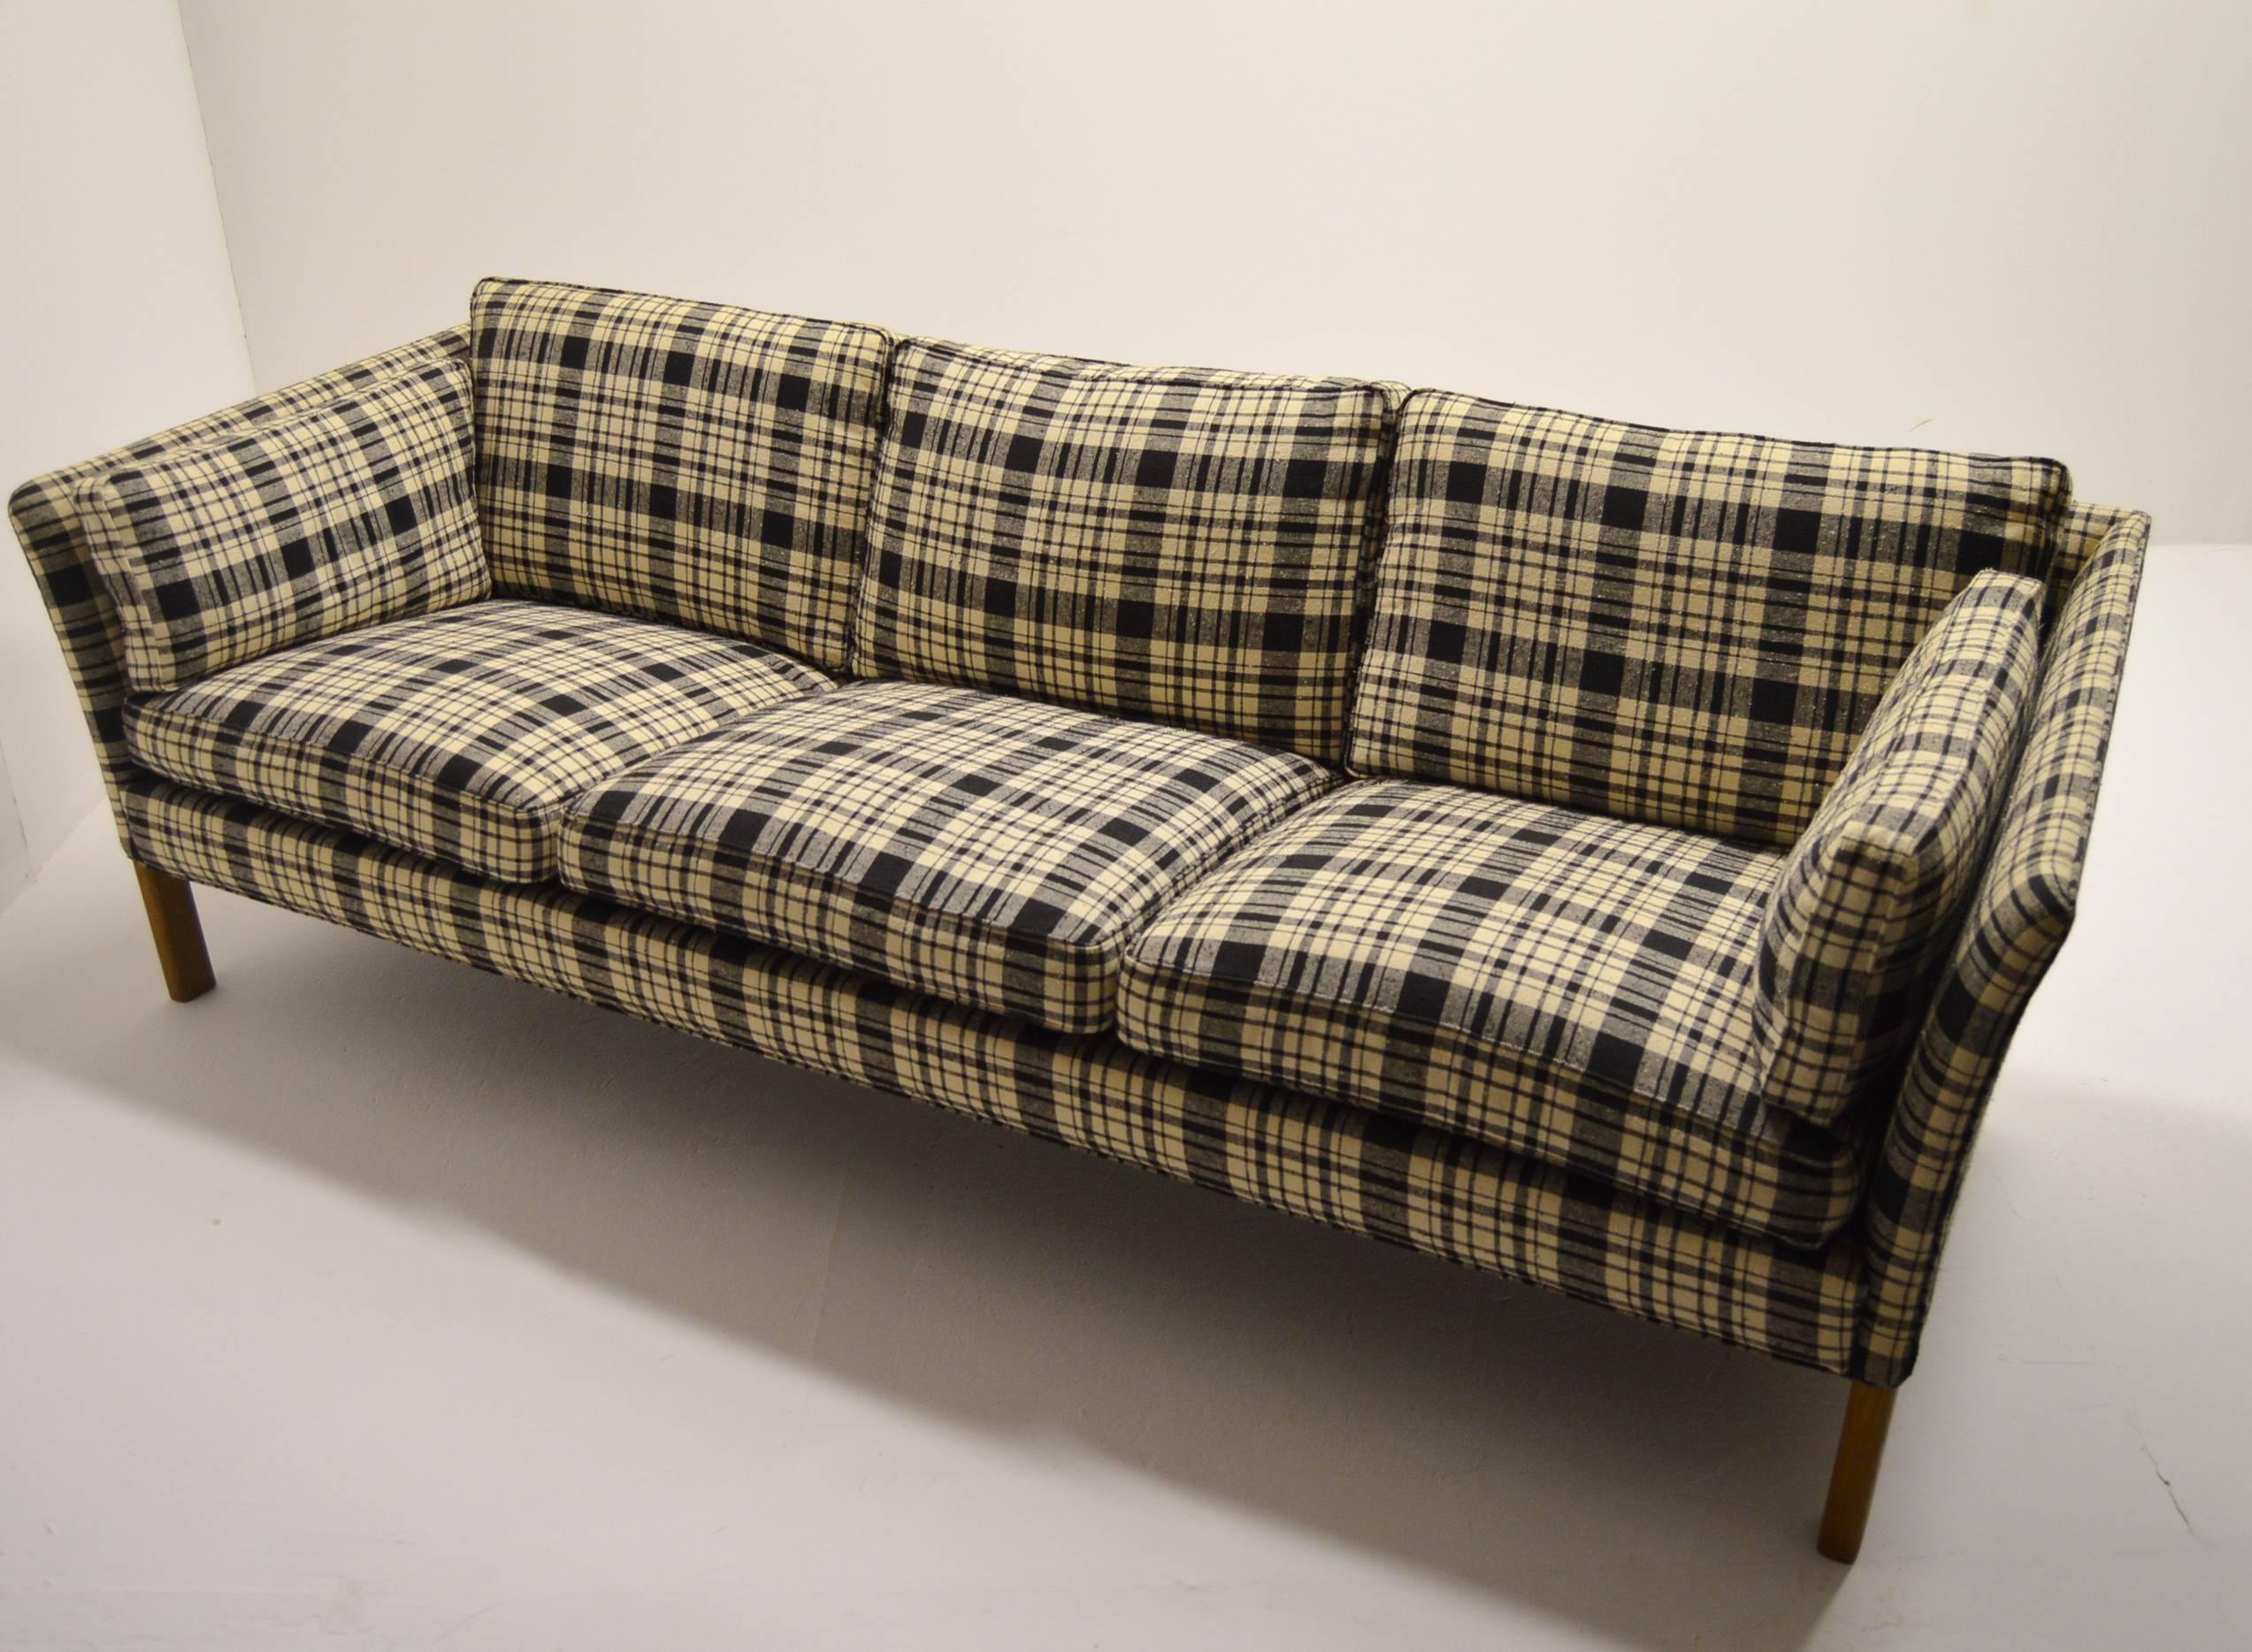 Sofa Cromwell designed by Arne Norell and produced by Norell Mobler.